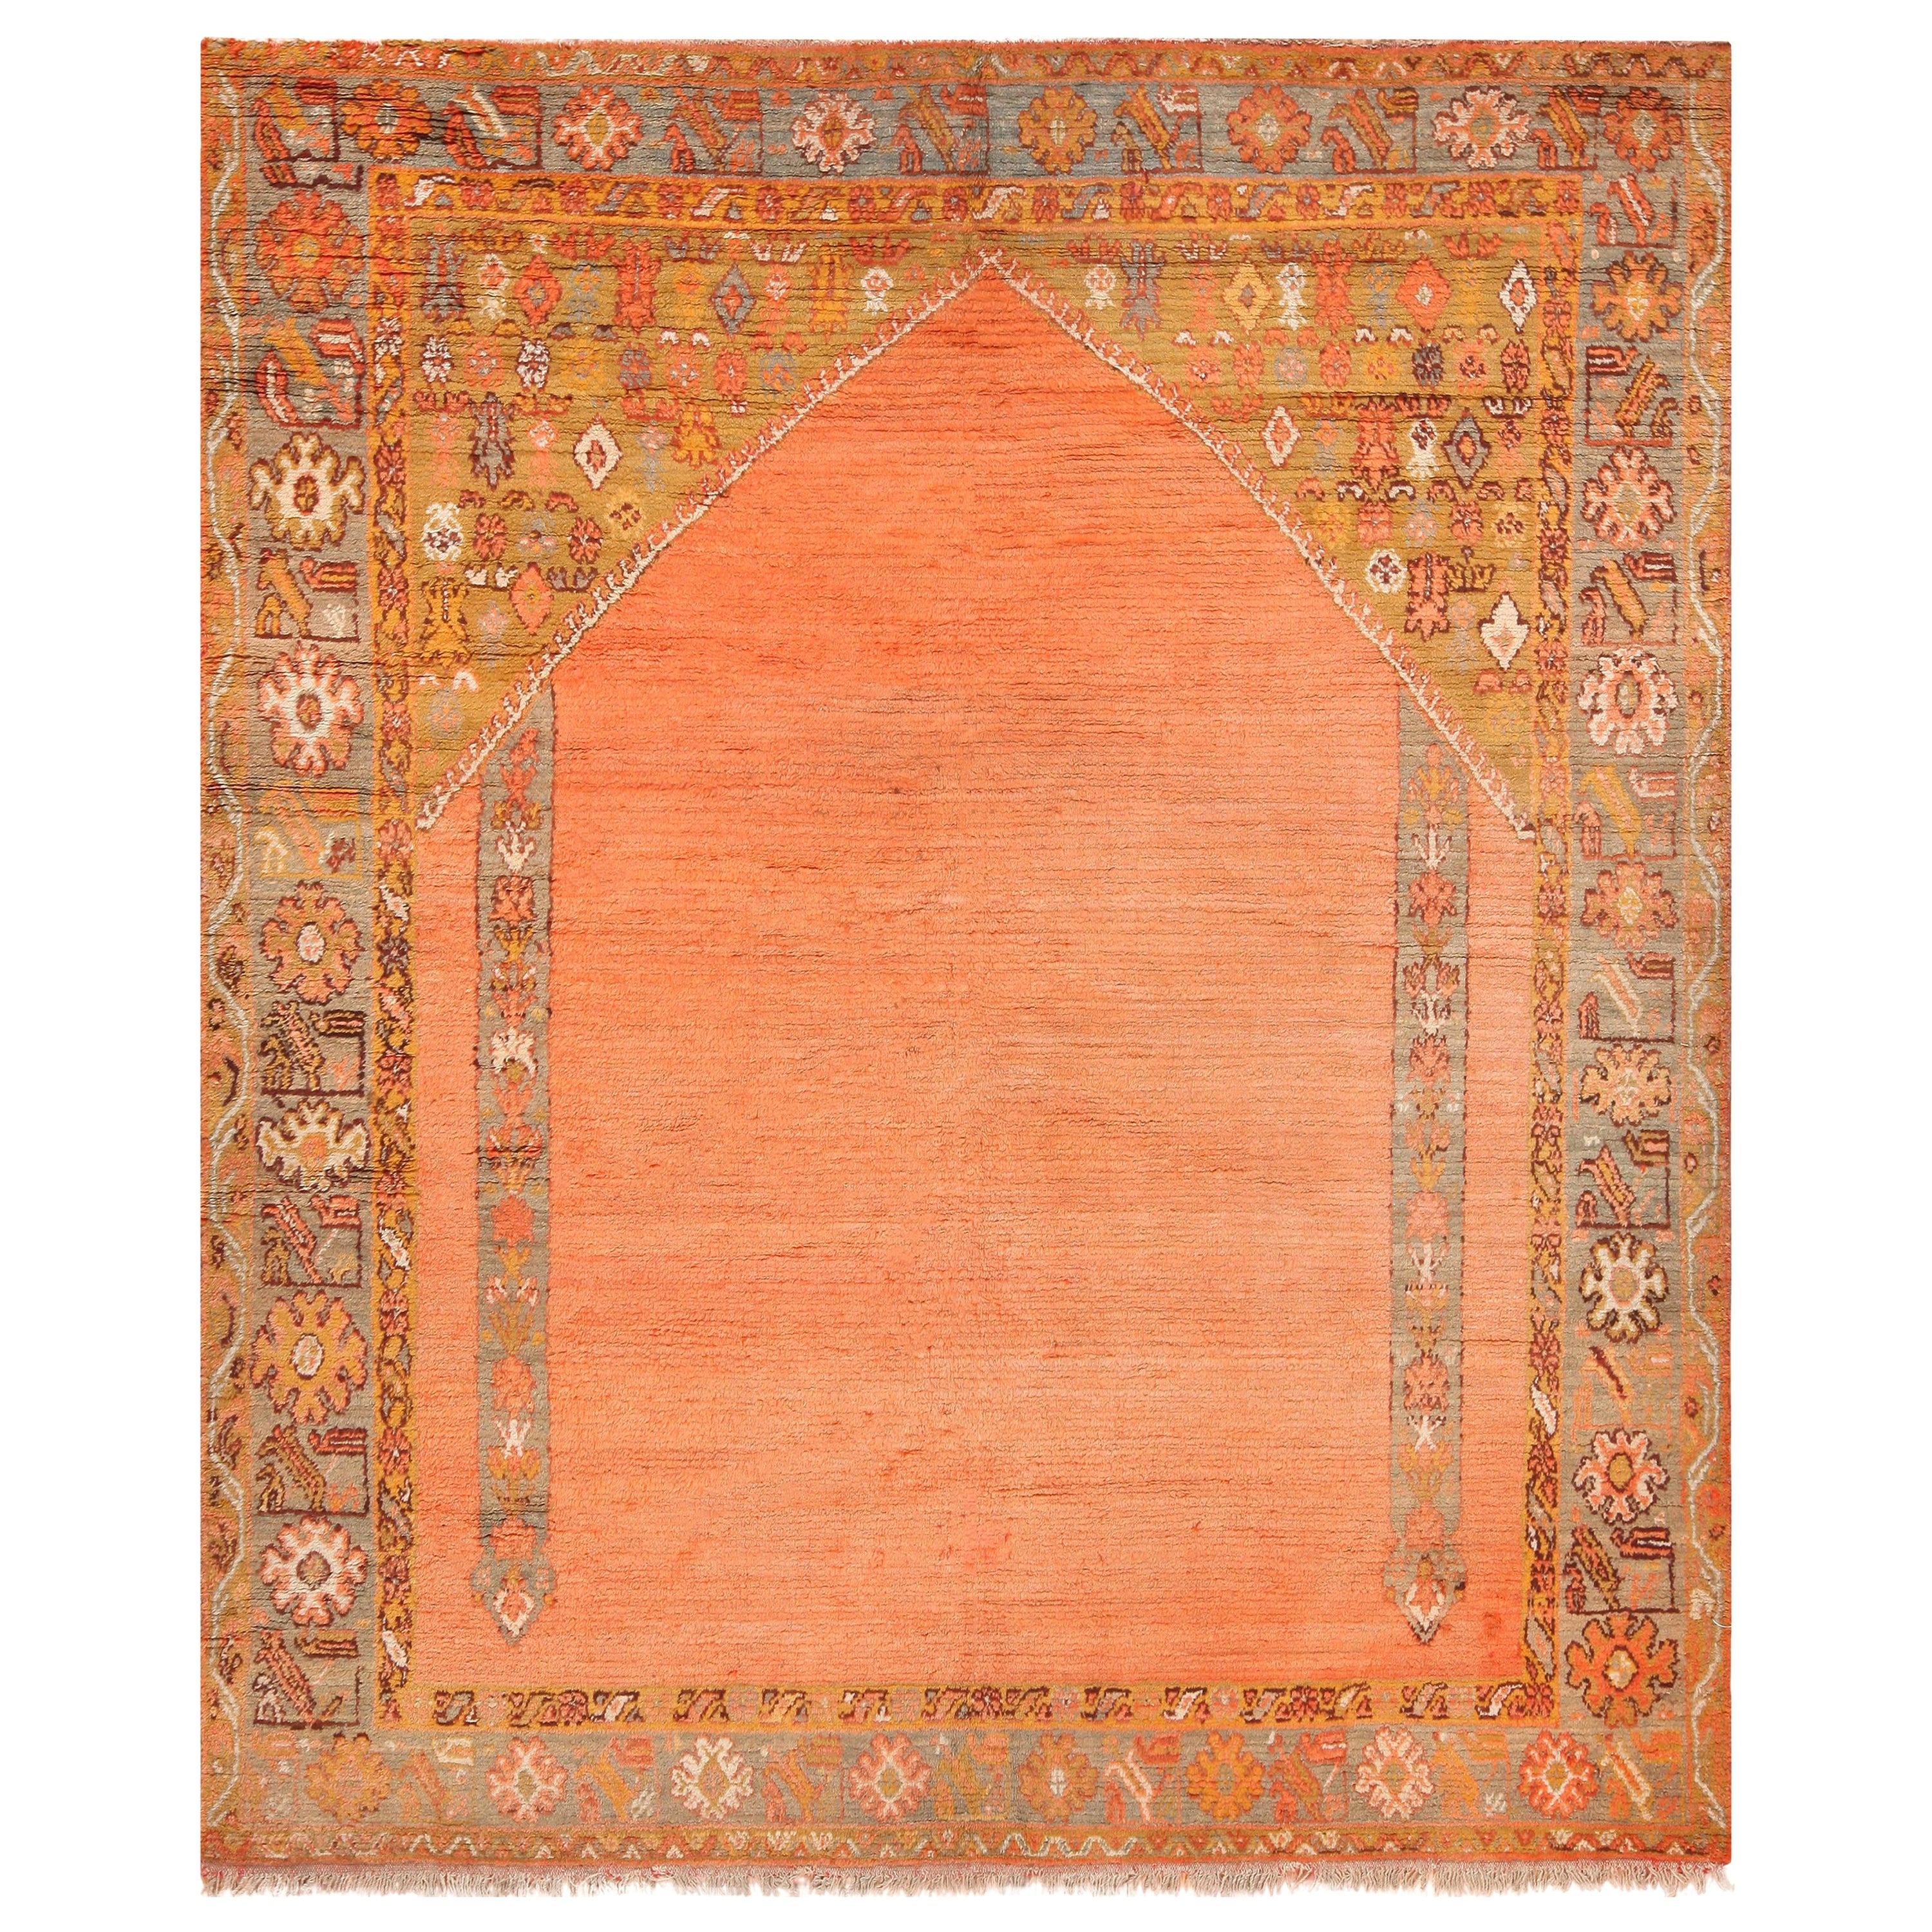 What is a prayer rug called?